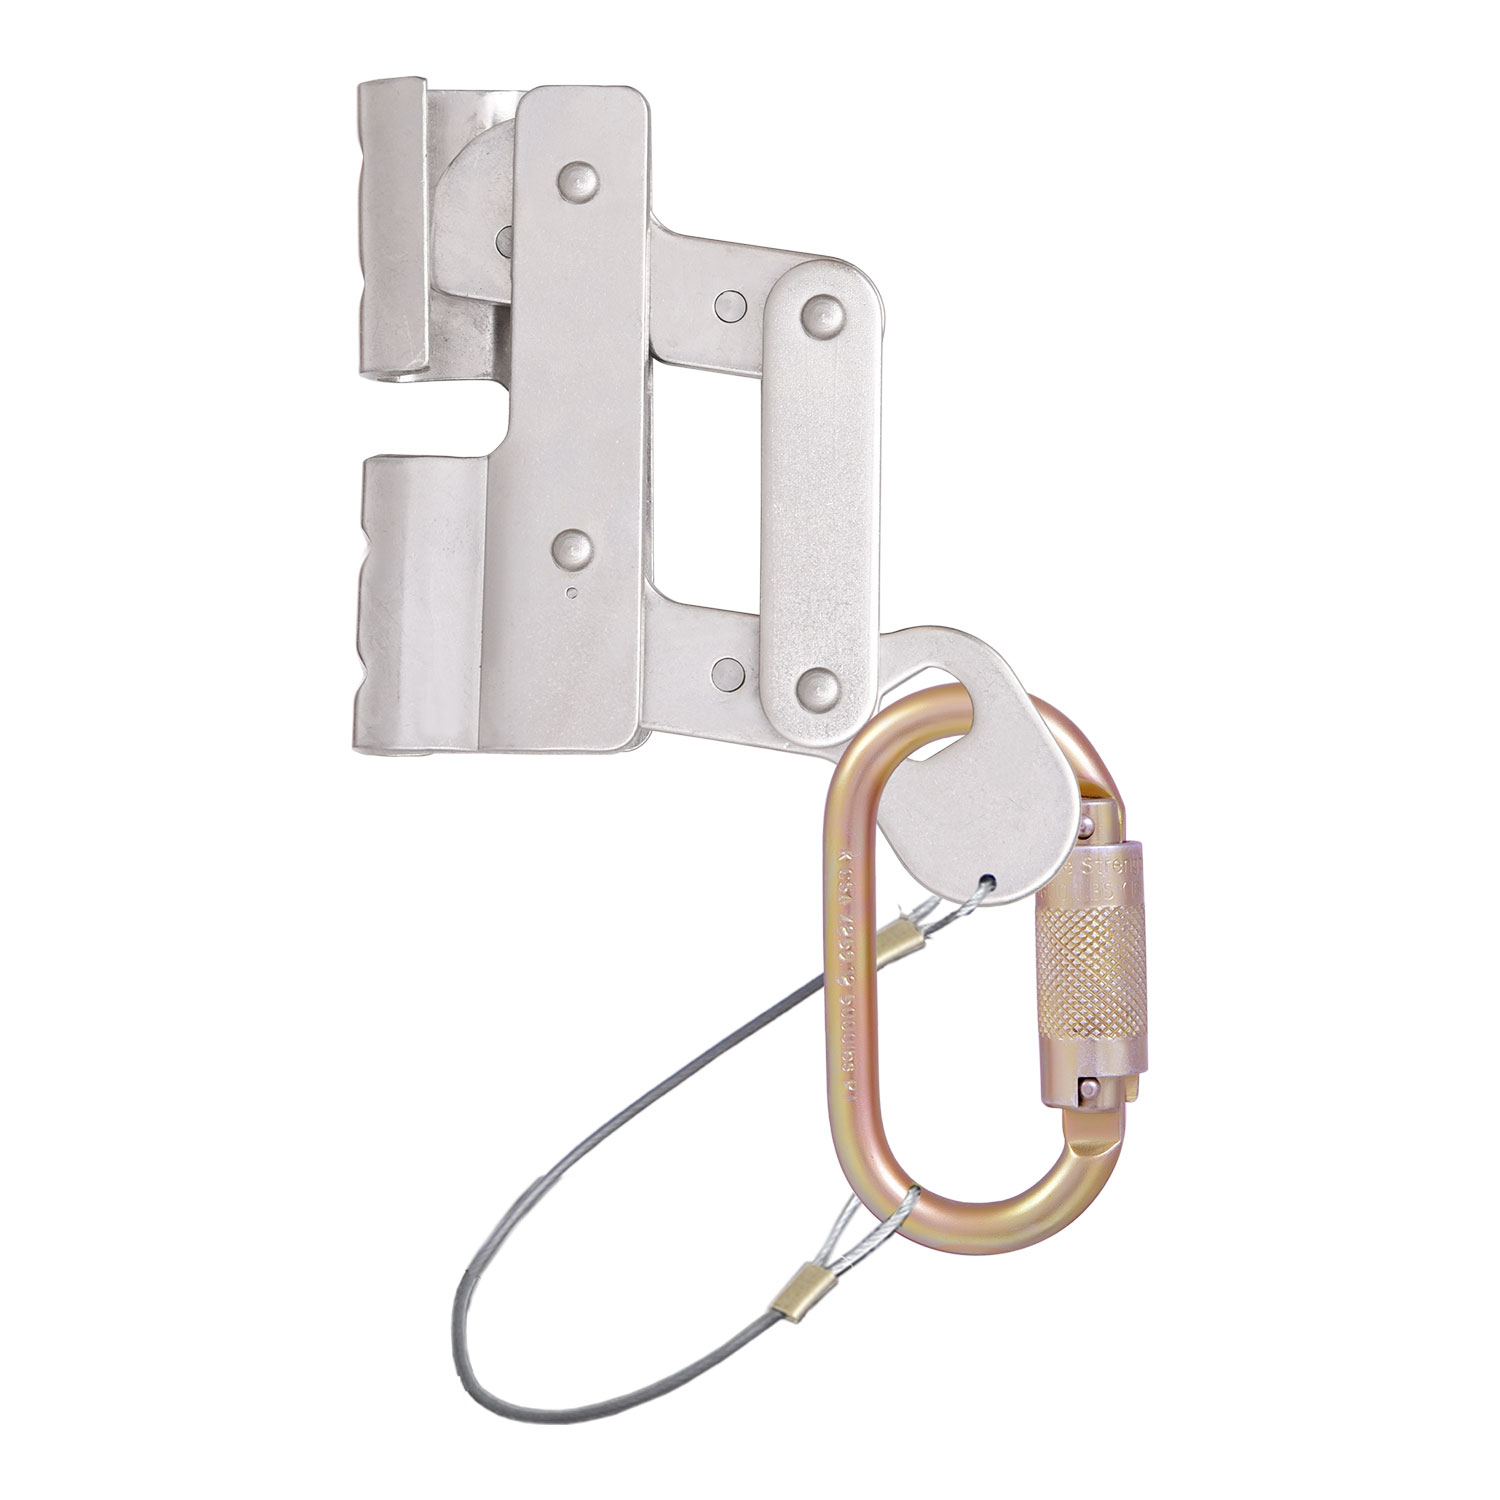 KStrong® Ladder Climbing Cable System for Fixed Ladders - KStrong